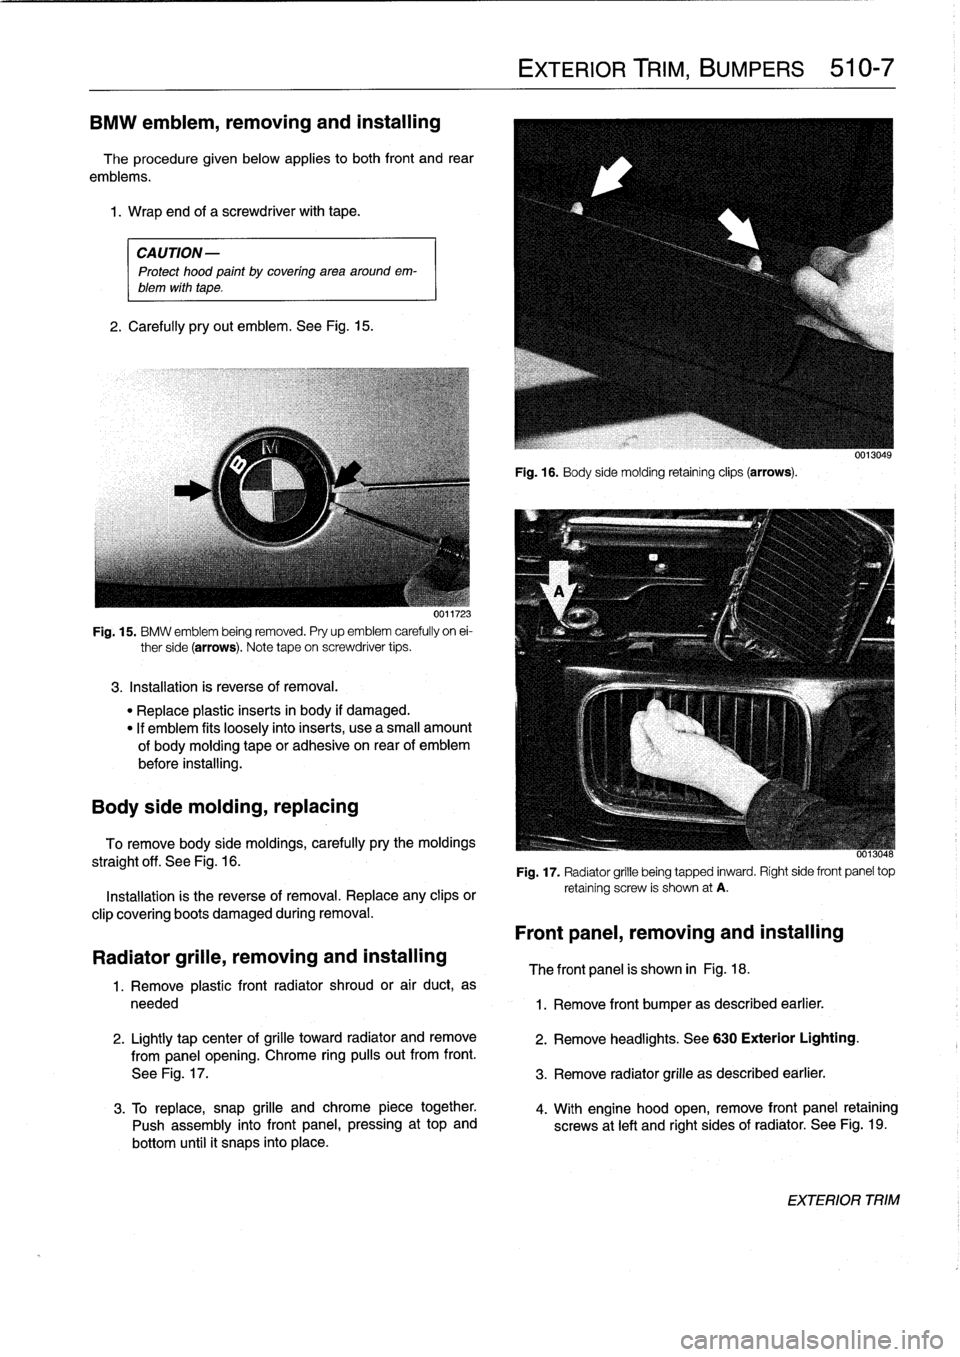 BMW 318i 1998 E36 Workshop Manual 
BMW
emblem,
removing
and
installing

The
procedure
given
below
applies
to
both
front
and
rear

emblems
.

1
.
Wrap
and
of
a
screwdriver
with
tape
.

CAUTION-

Protect
hood
paint
by
coveringarea
aroun